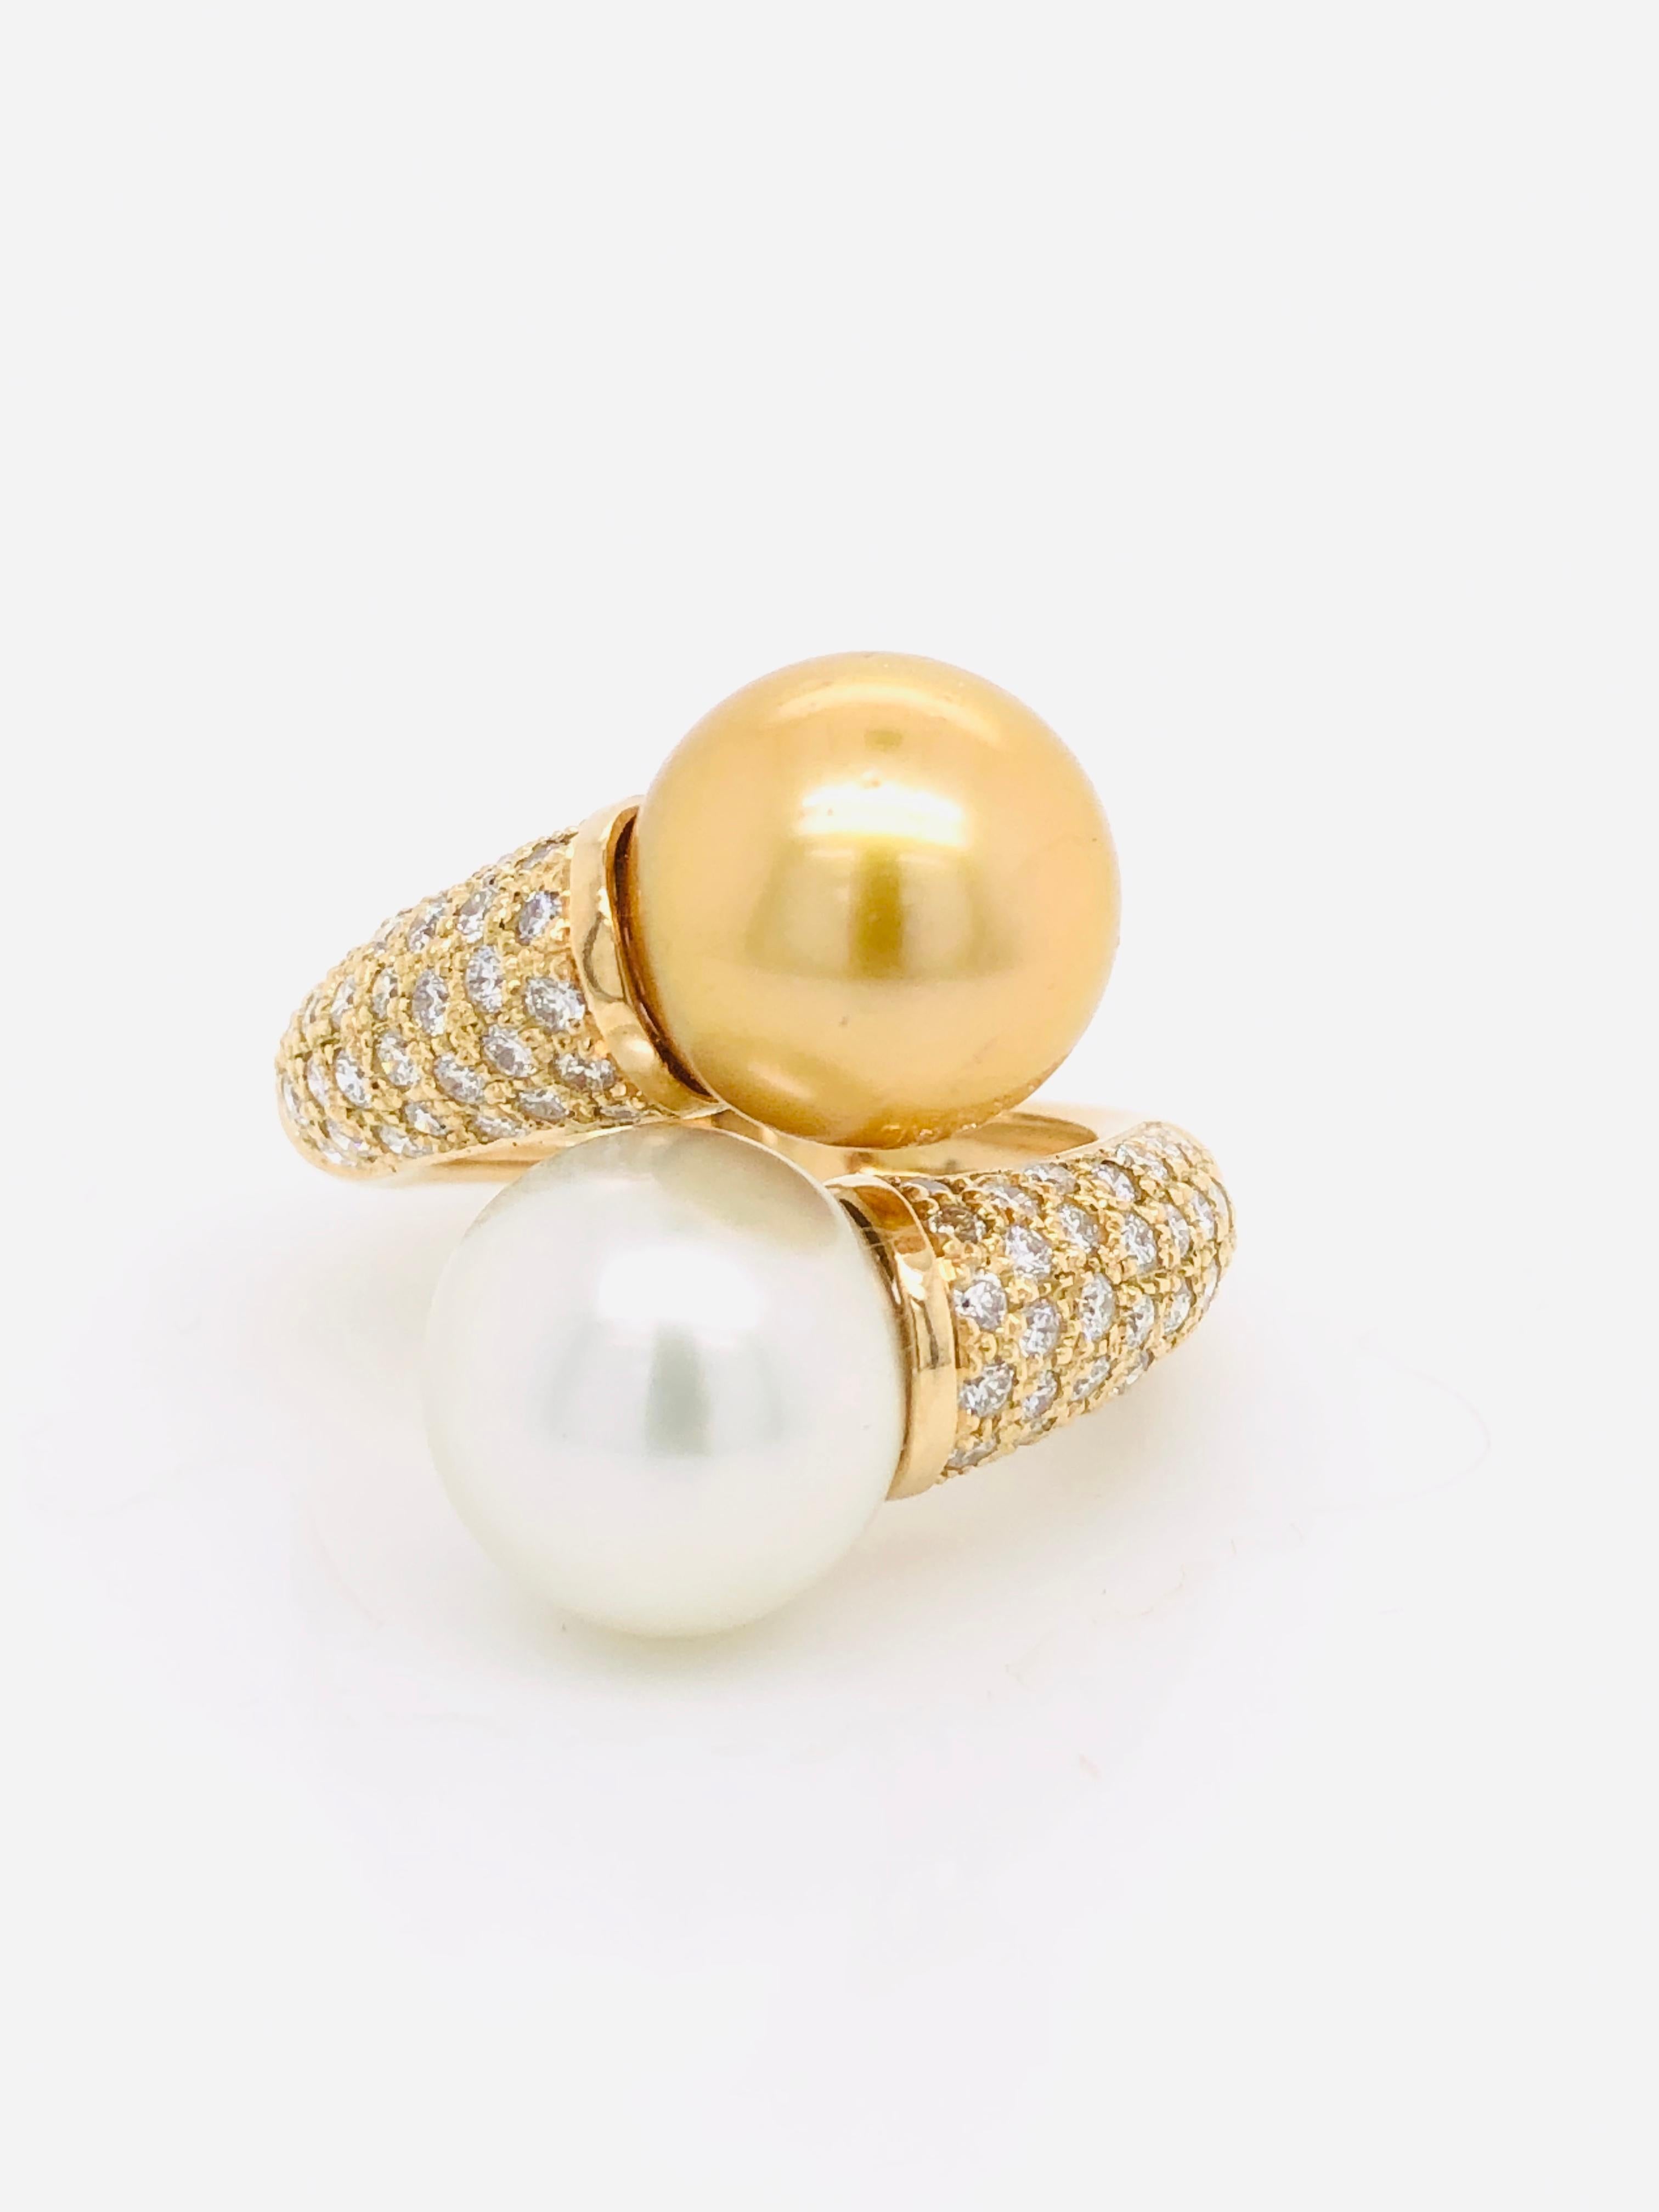 Women's South Sea Pearls with White Diamonds on Gold 18 Carat Ring